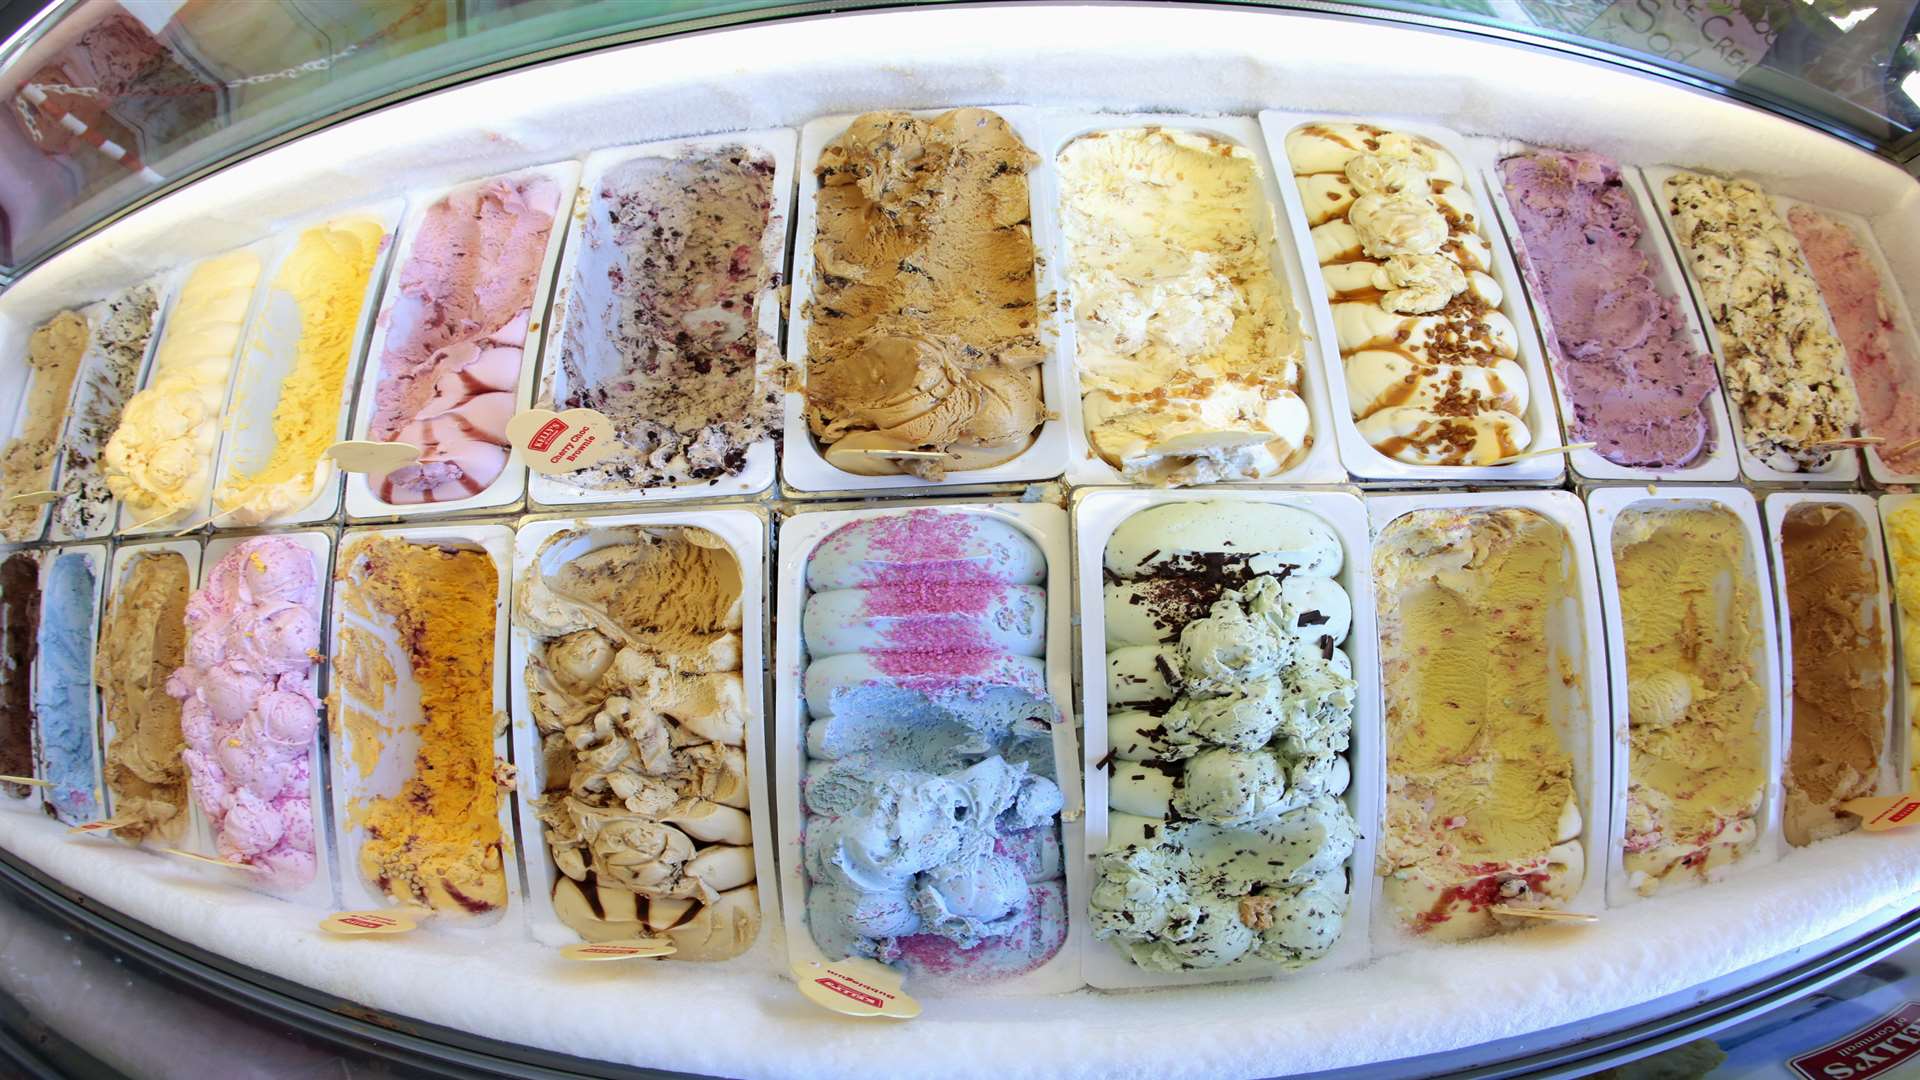 The cafe boasts 42 flavours of Kelly's ice cream